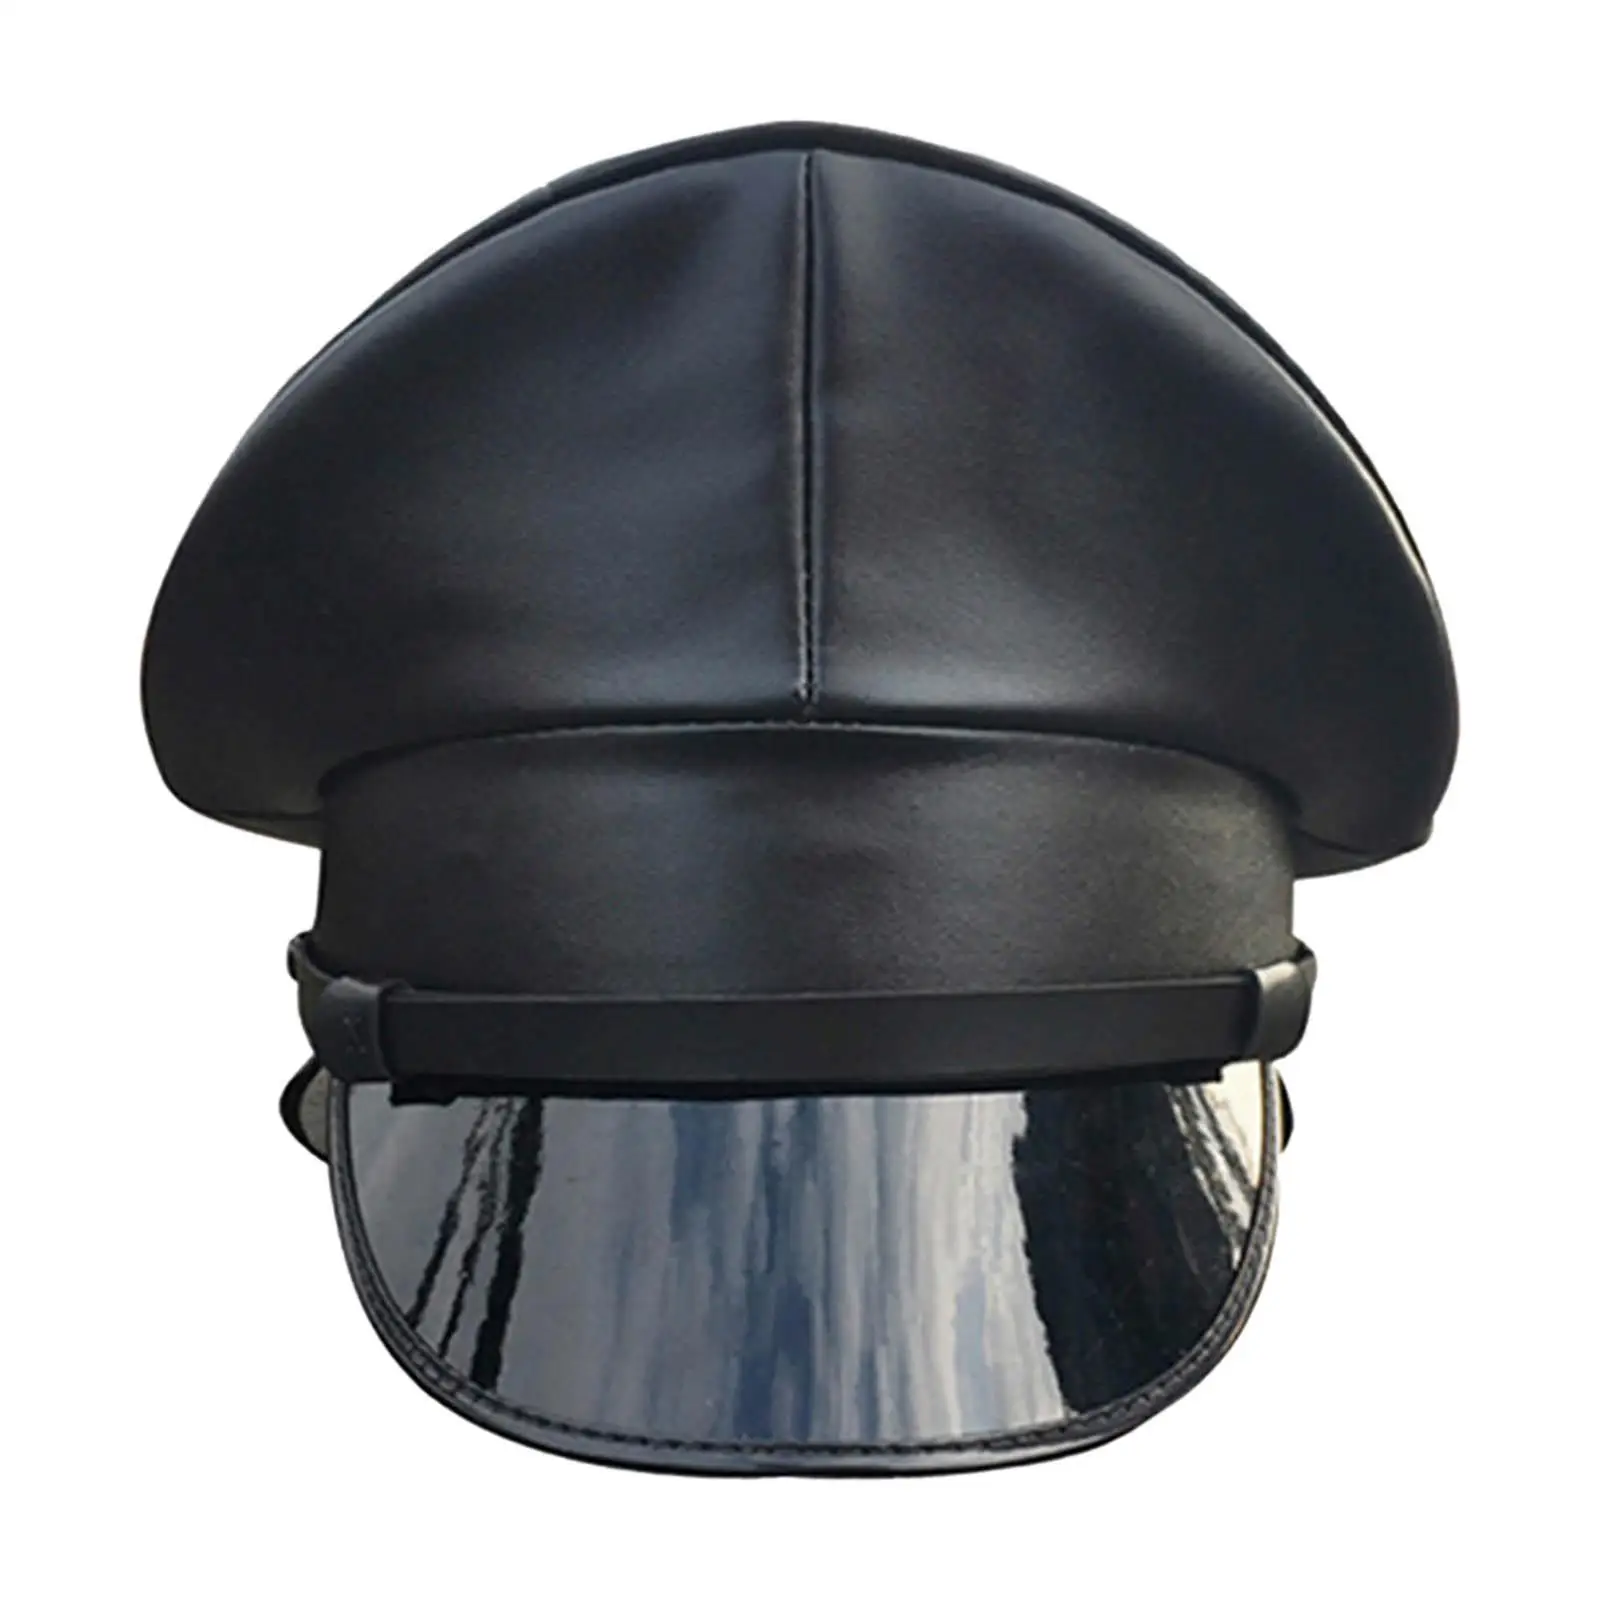 Captain Hat Peaked Hat German Style Costume PU Leather for Stage Performance